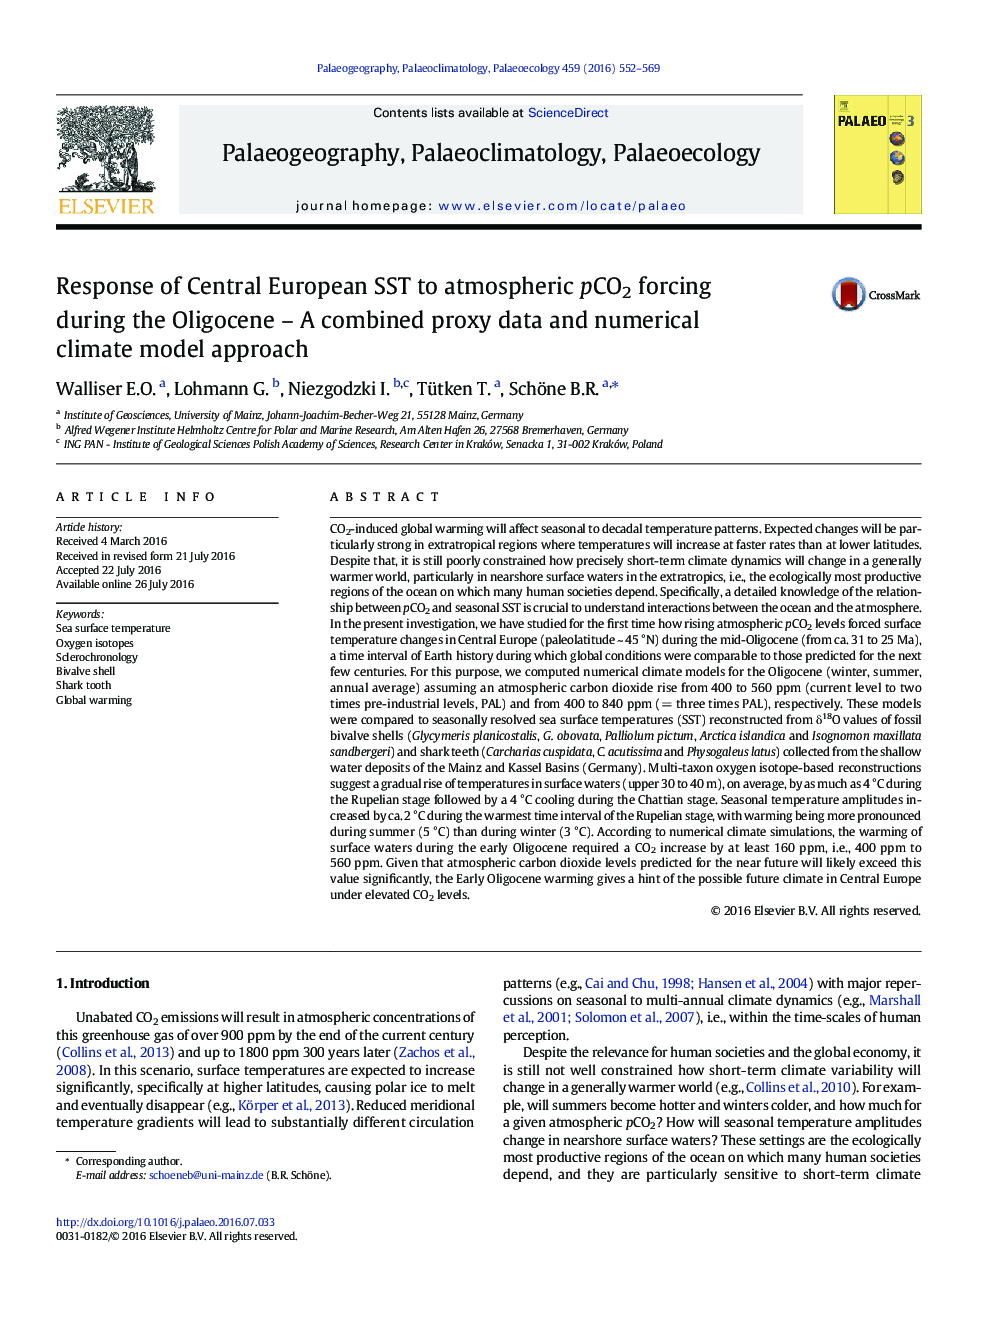 Response of Central European SST to atmospheric pCO2 forcing during the Oligocene – A combined proxy data and numerical climate model approach